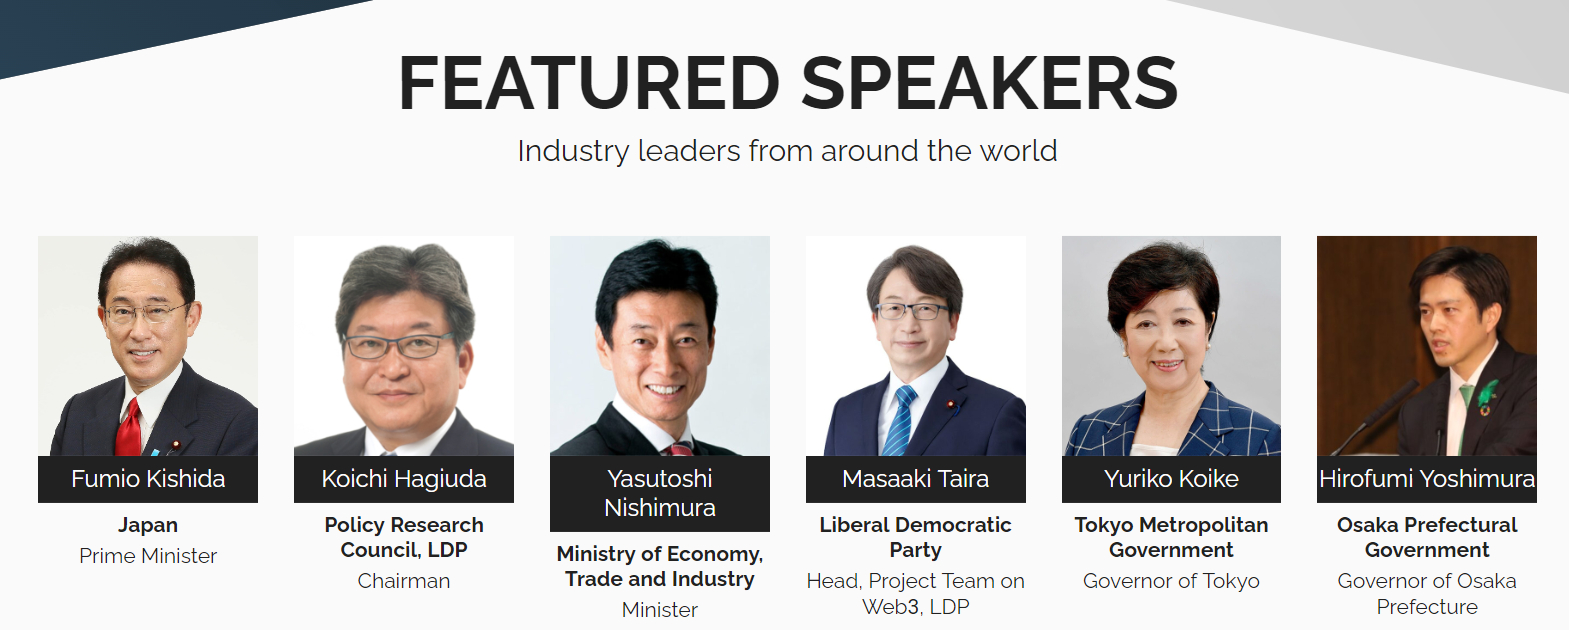 A list of speakers at the WebX conference in Tokyo, Japan.